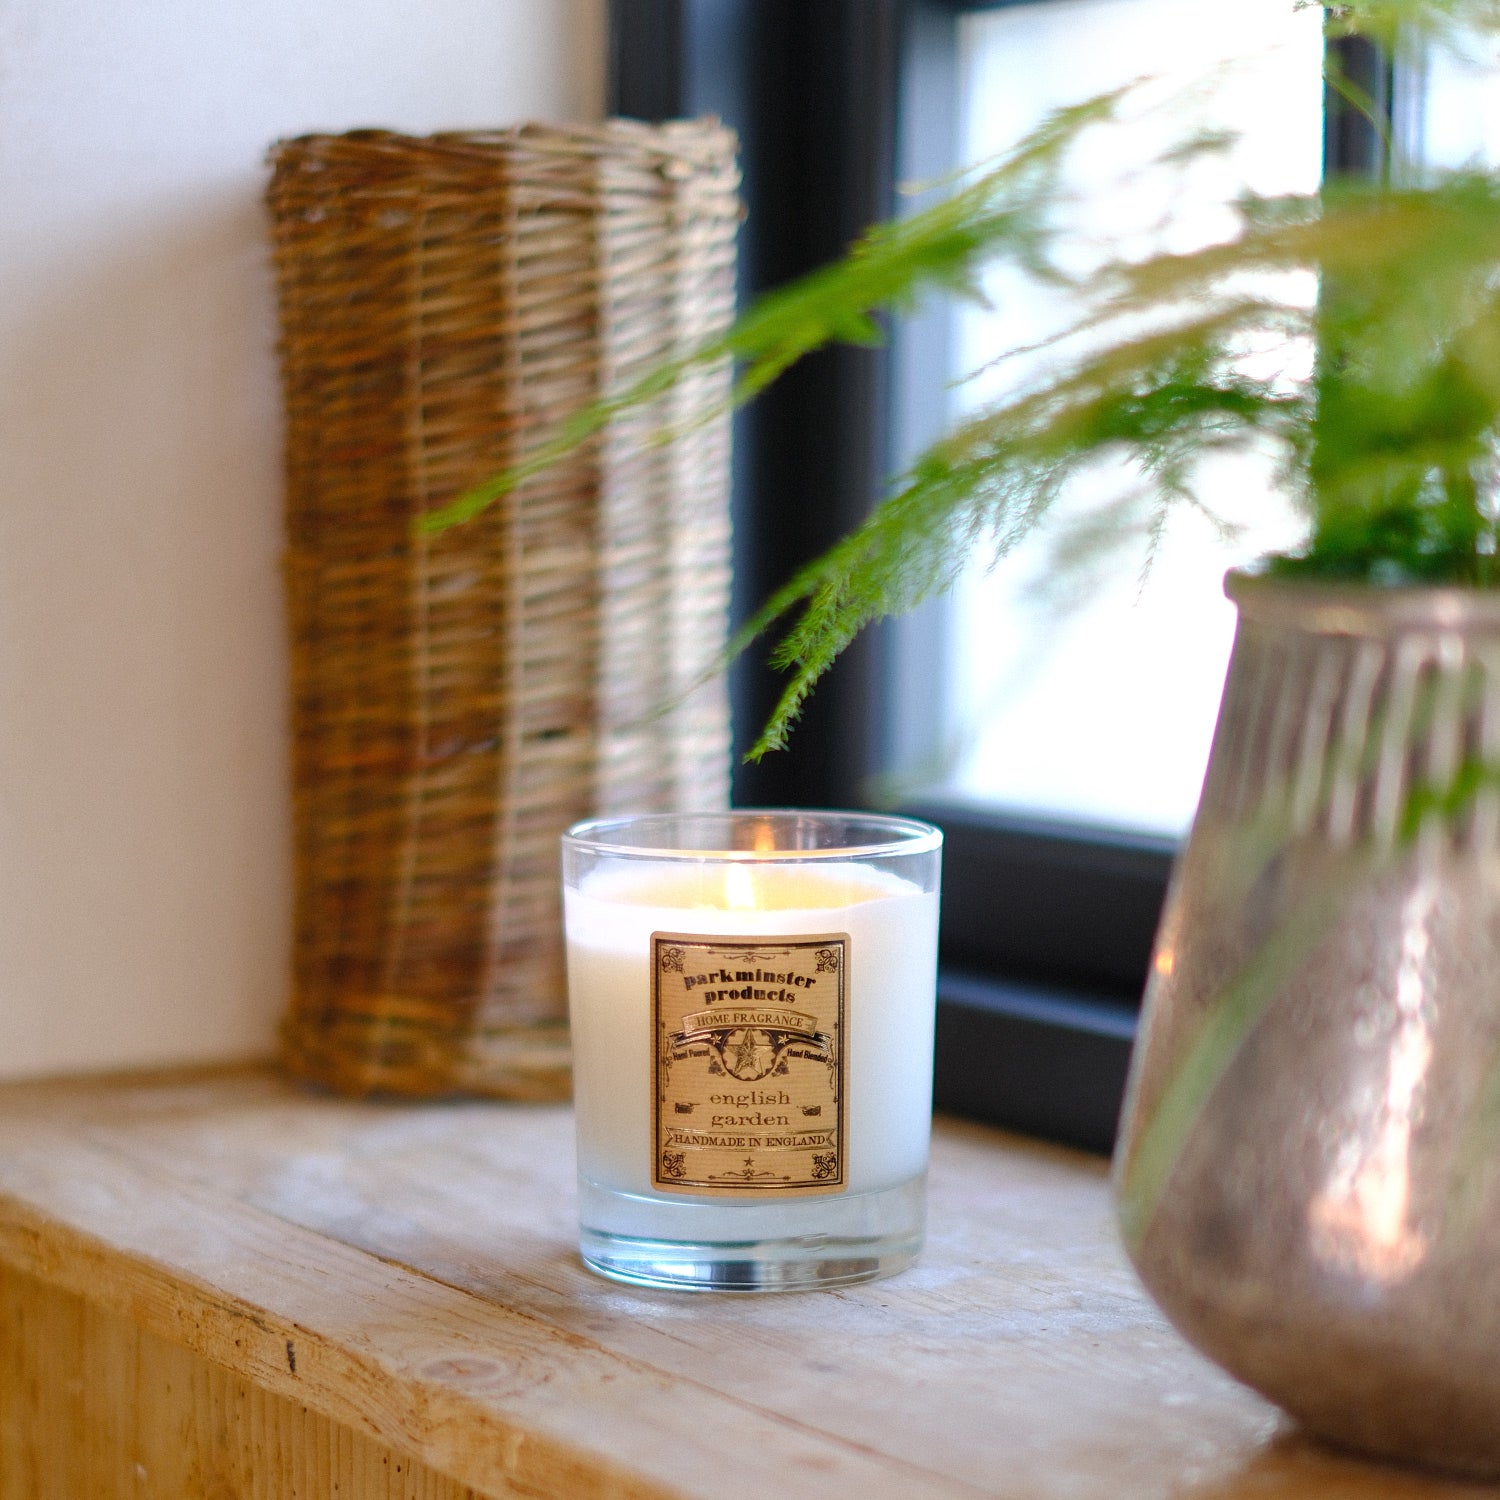 Parkminster's large votive soy wax candles, crafted with the unique English Garden fragrance, created in our Cornwall workshop by skilled artisans